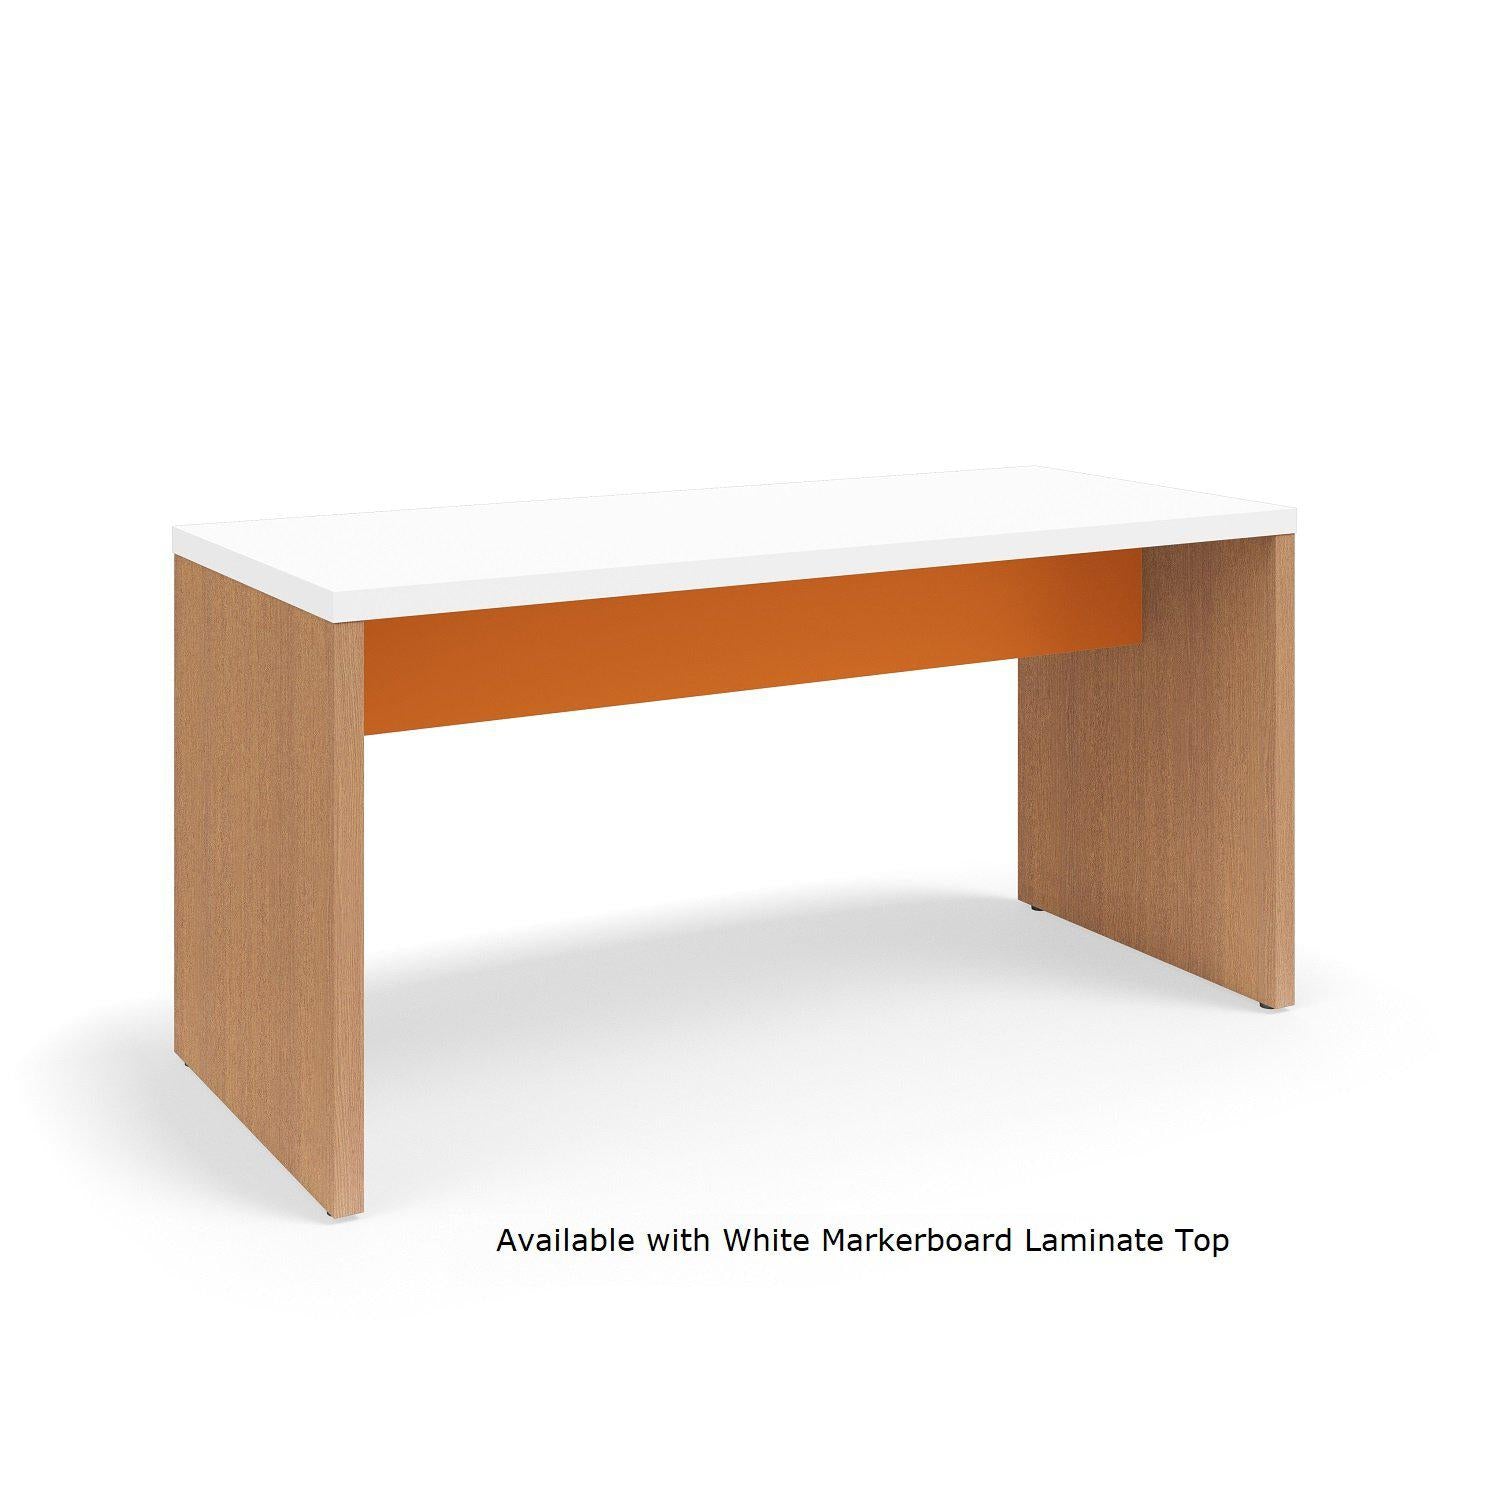 Serenade Gathering Table, Café Height, Double-Sided, 36" x 84" x 42"H, Contrast Laminate, FREE SHIPPING